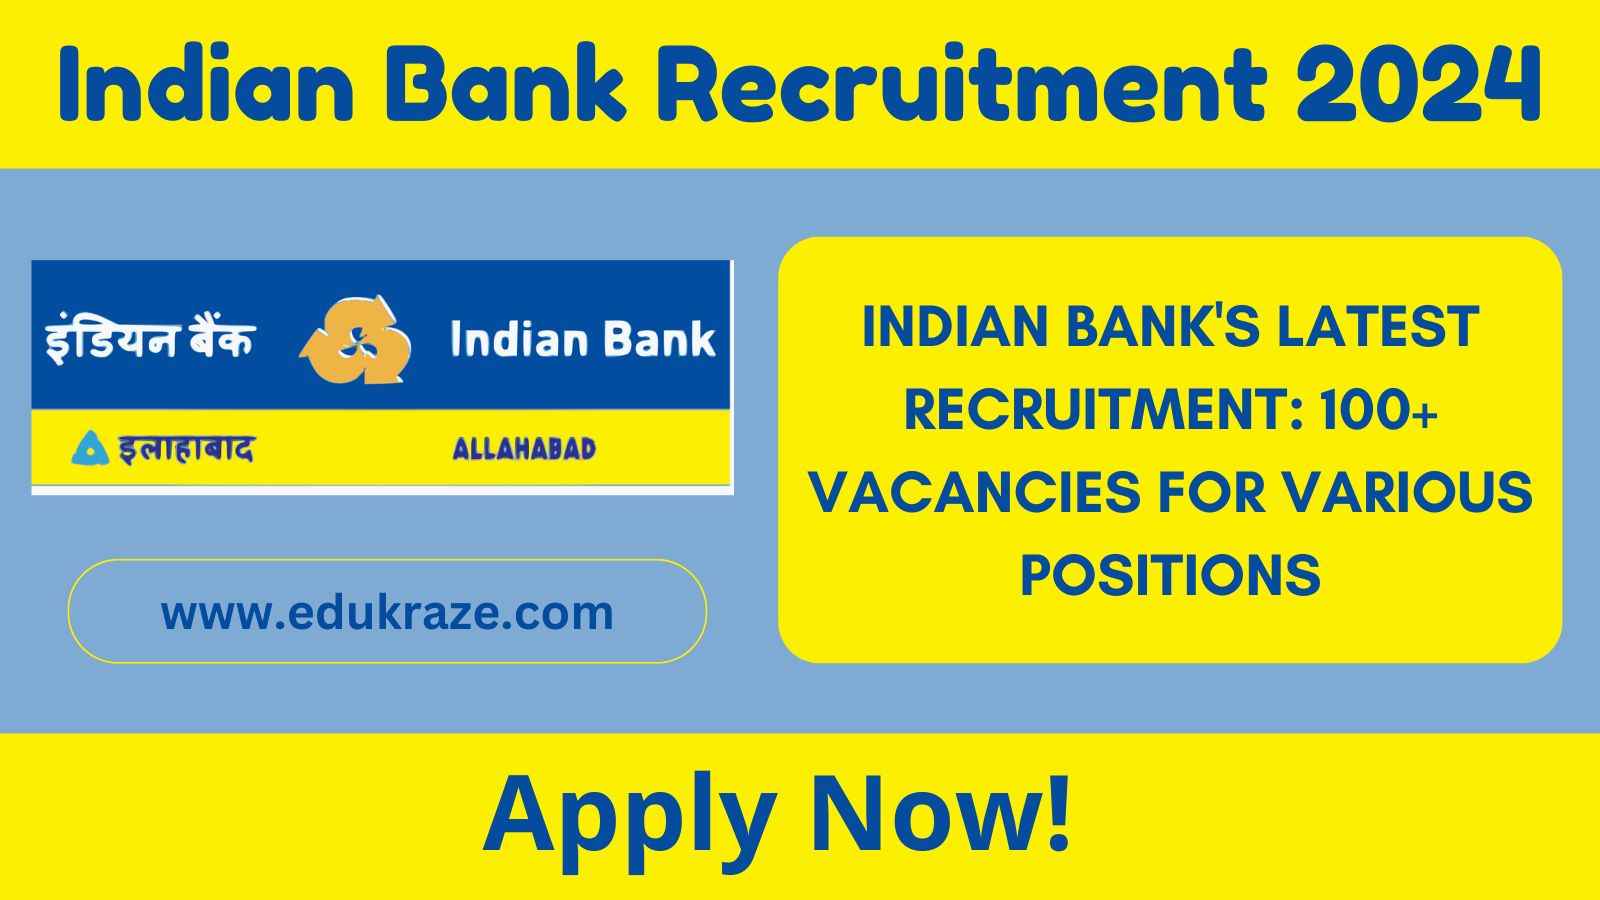 Indian Bank Recruitment Out for 100+ Vacancies, Check Notification!